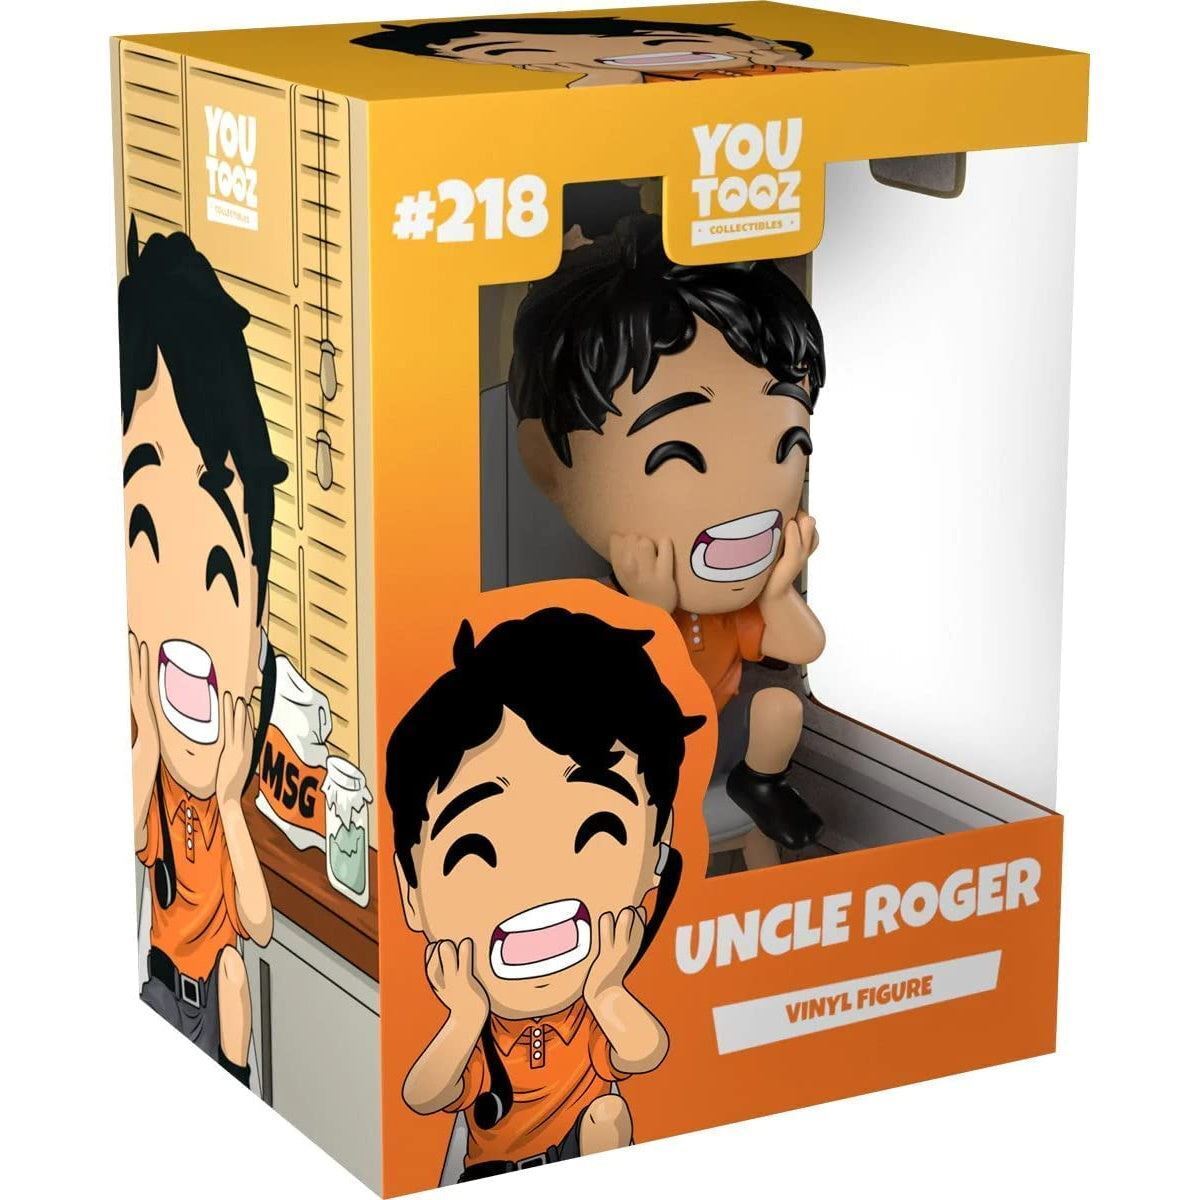 Youtooz: Uncle Roger Vinyl Figure [Toys, Ages 15+, #218] NEW